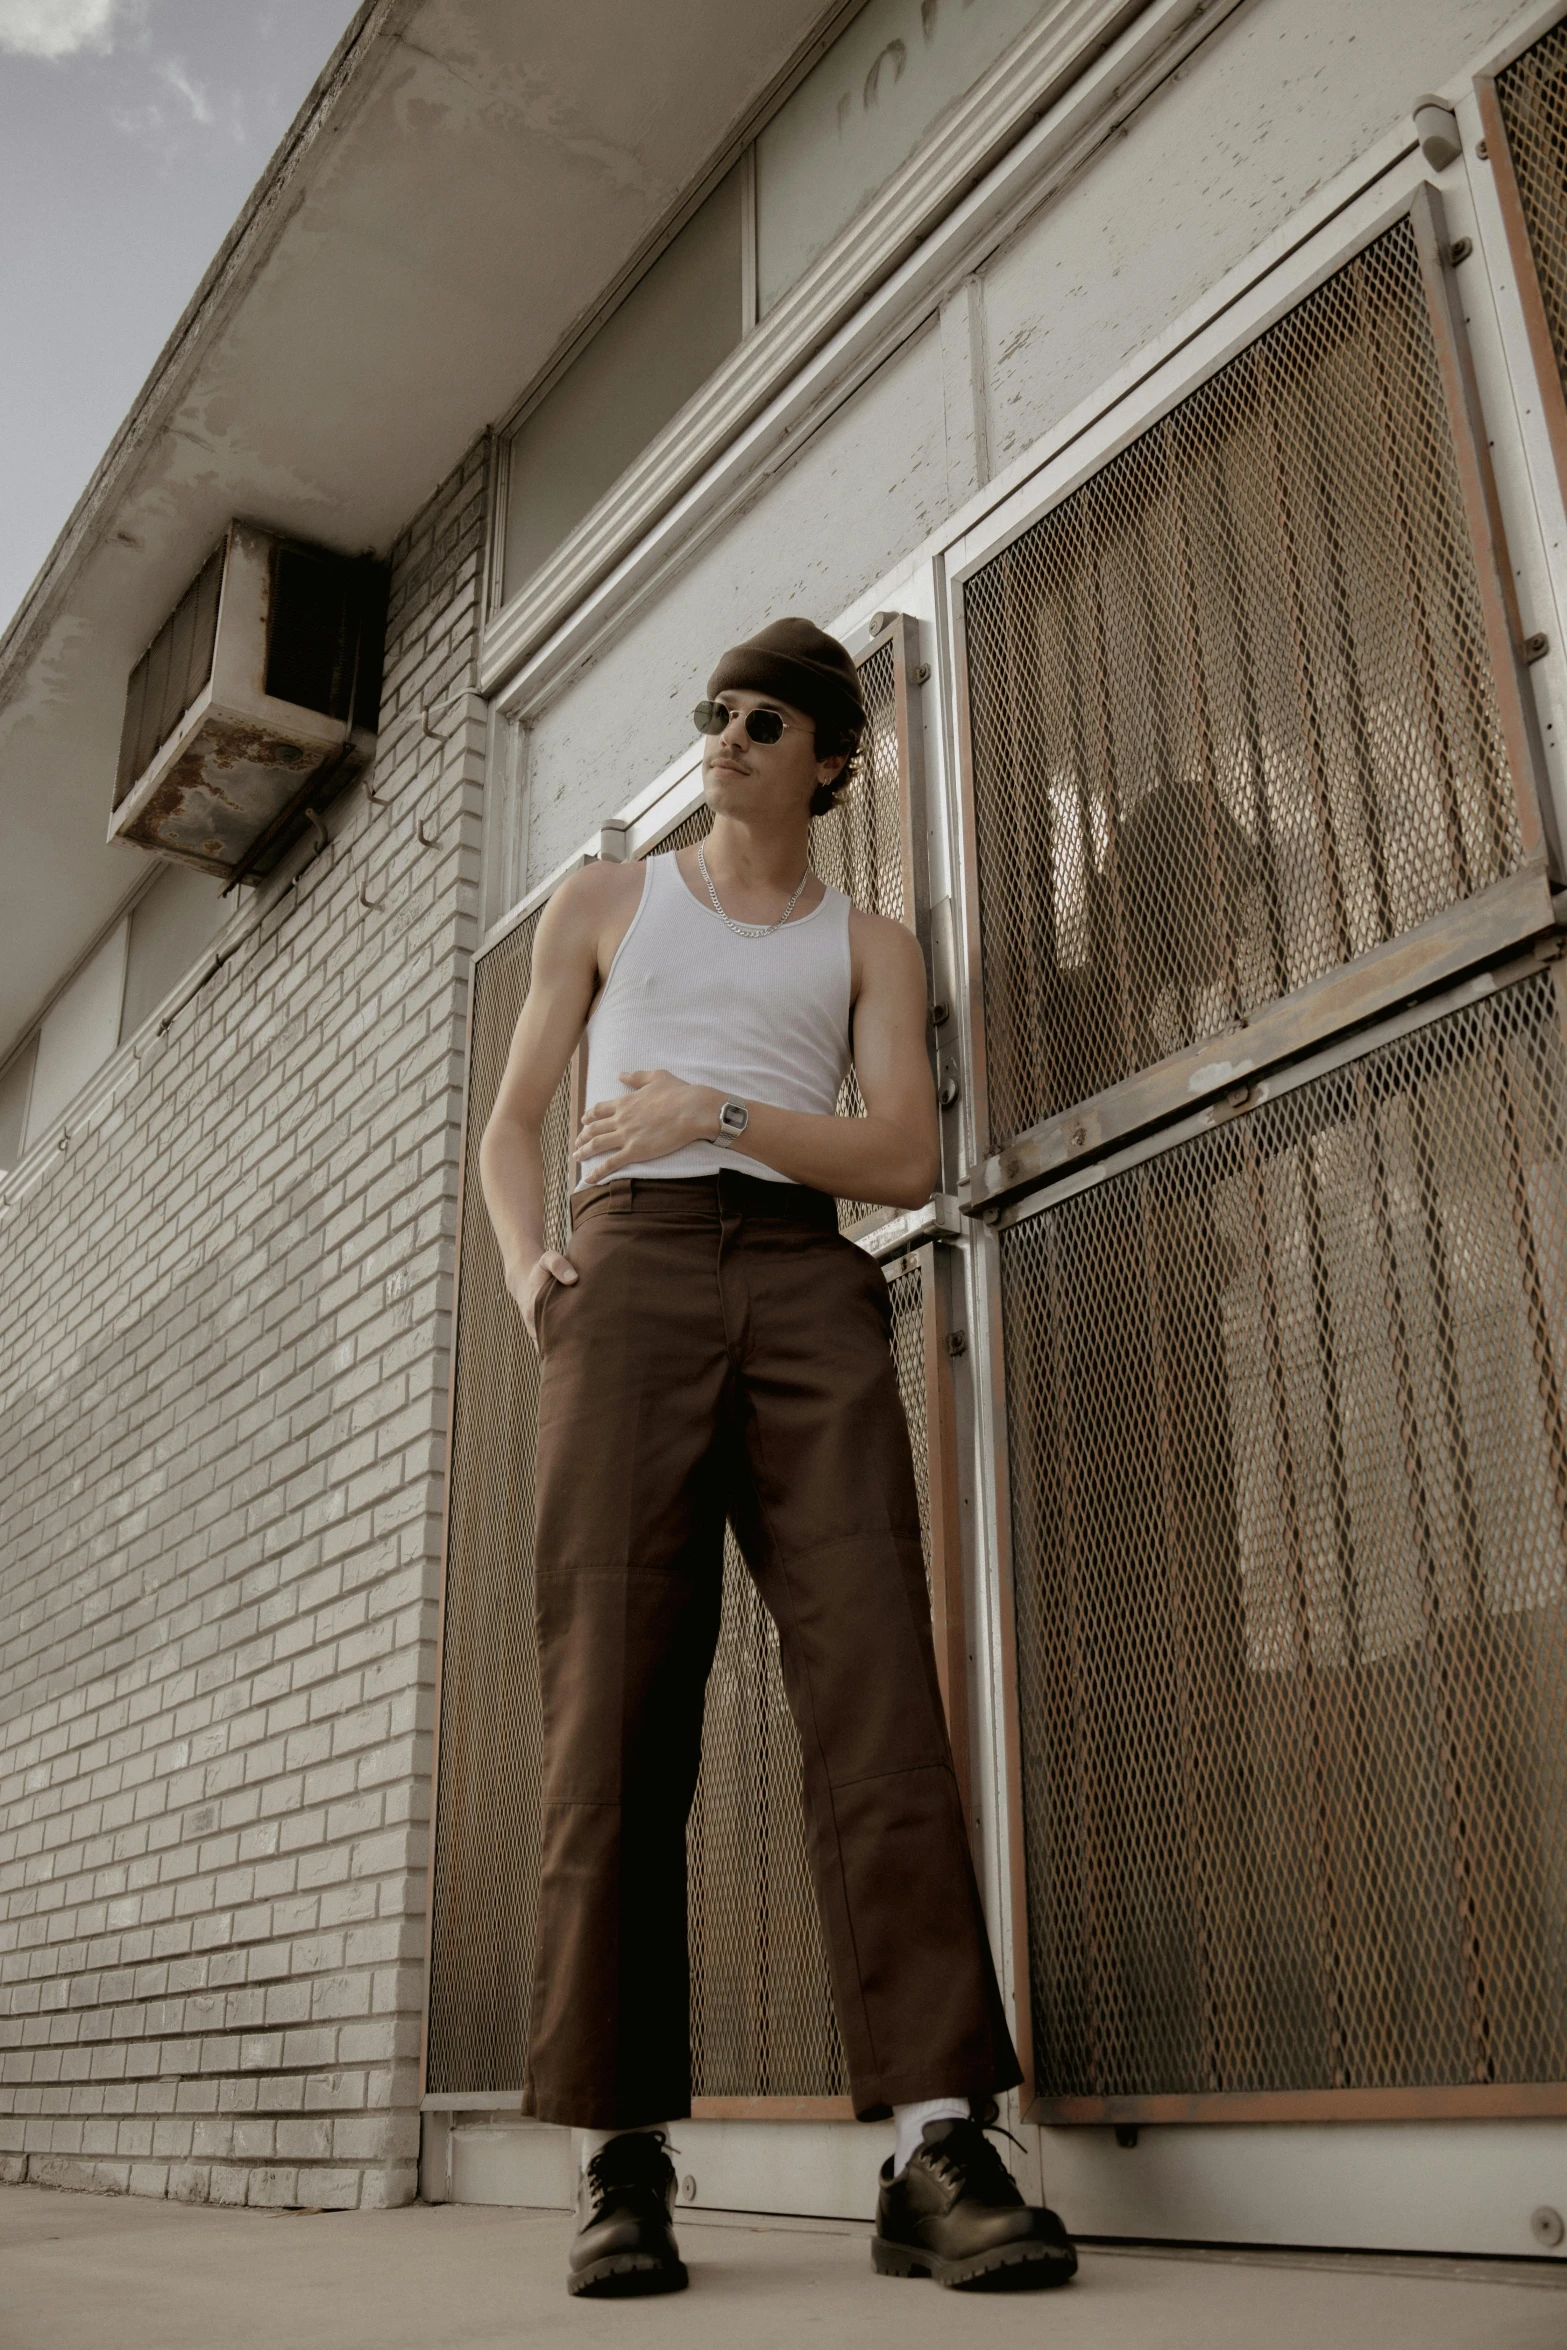 a man leaning against a building wearing sunglasses